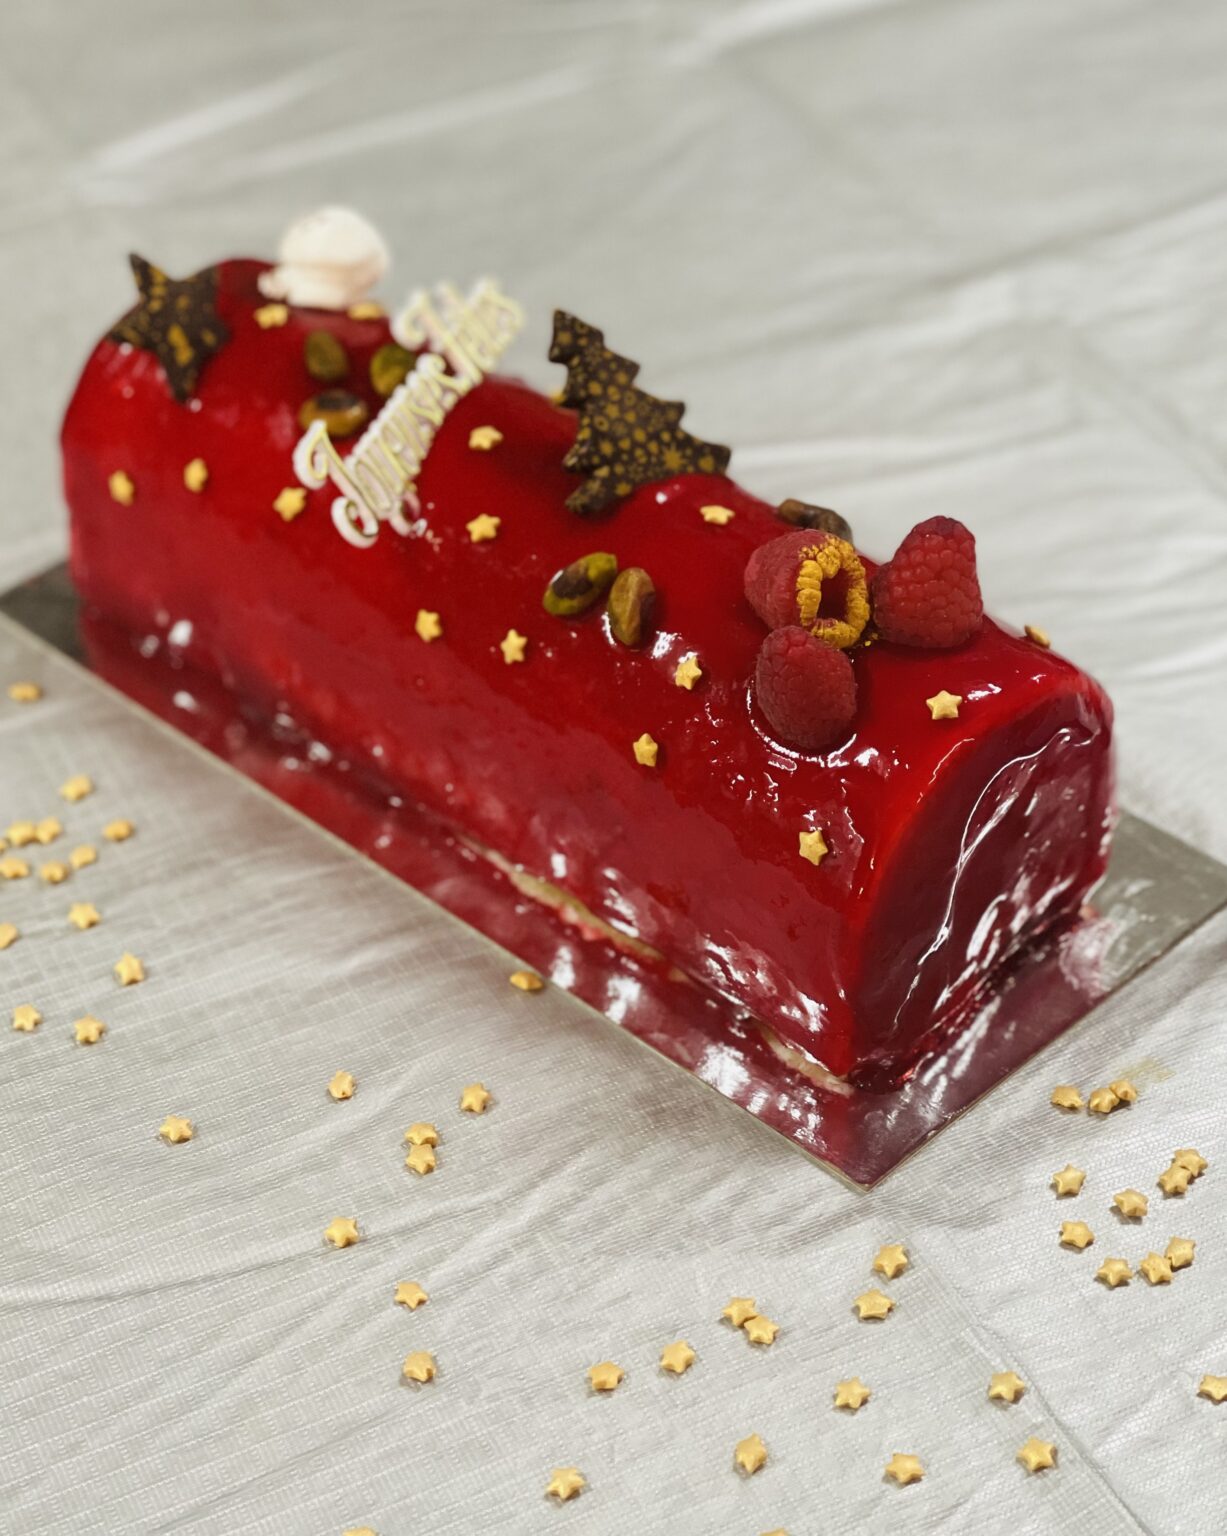 Dairy and Gluten Free Raspberry and Pistachio Holiday Log by L'Artisan Delice